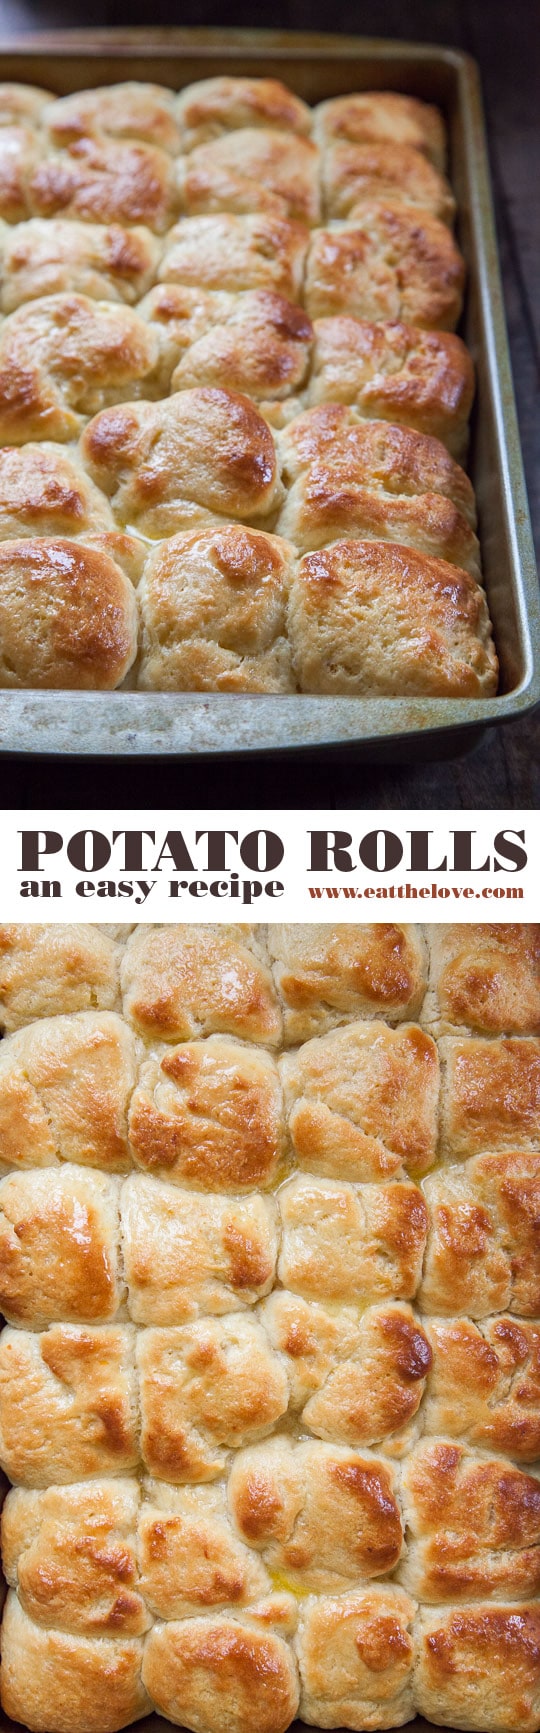 Potato Rolls Recipe, an easy no knead yeasted dinner roll recipe. Photo and recipe by Irvin Lin of Eat the Love.